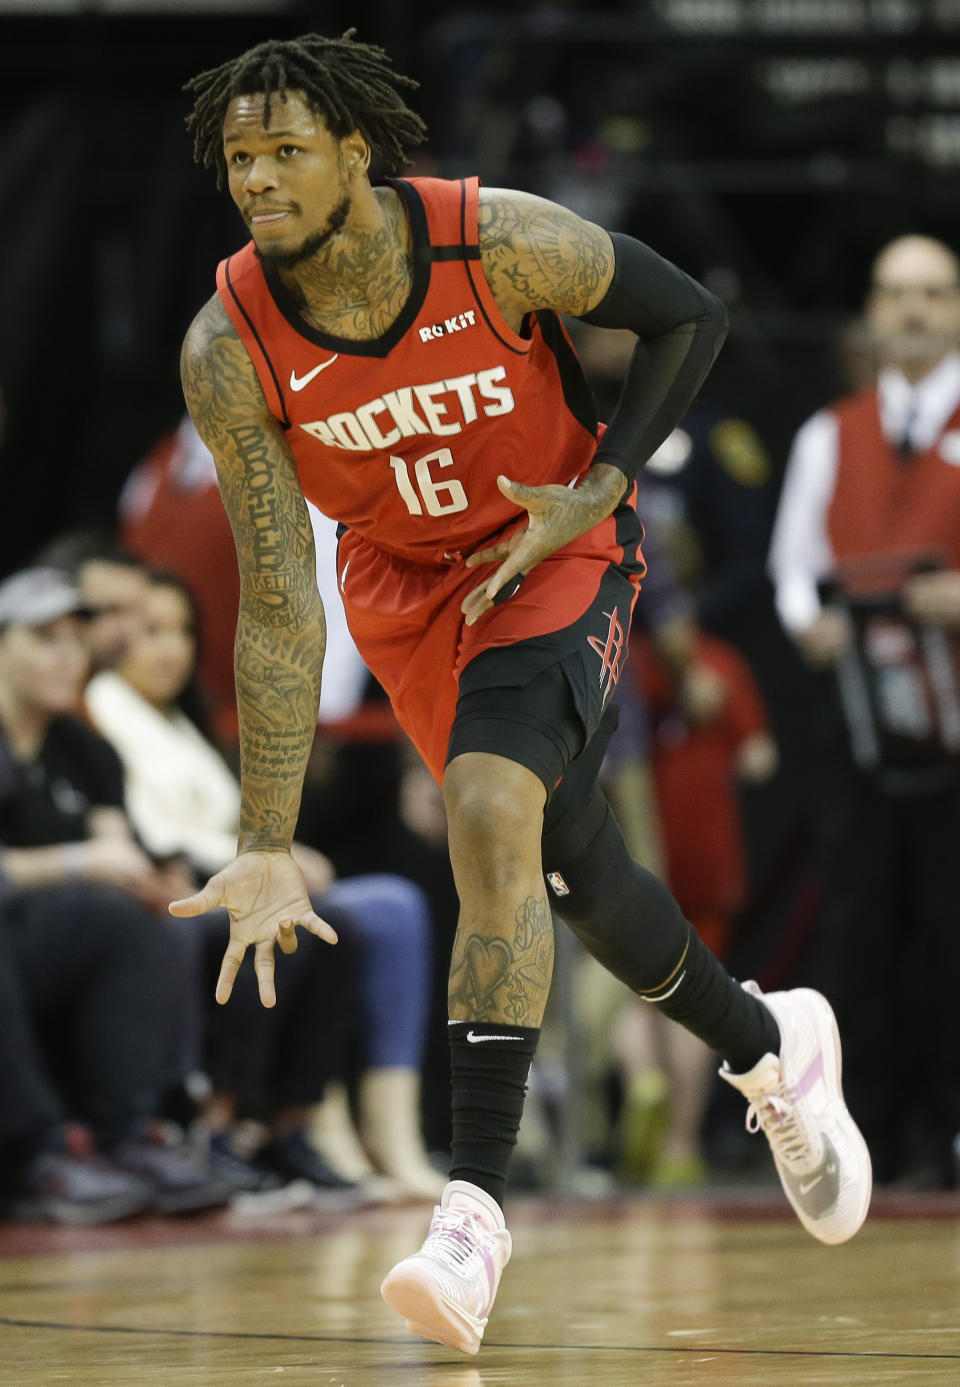 Houston Rockets guard Ben McLemore reacts after making a three-point basket during the first half of an NBA basketball game against the New Orleans Pelicans, Sunday, Feb. 2, 2020, in Houston. (AP Photo/Eric Christian Smith)